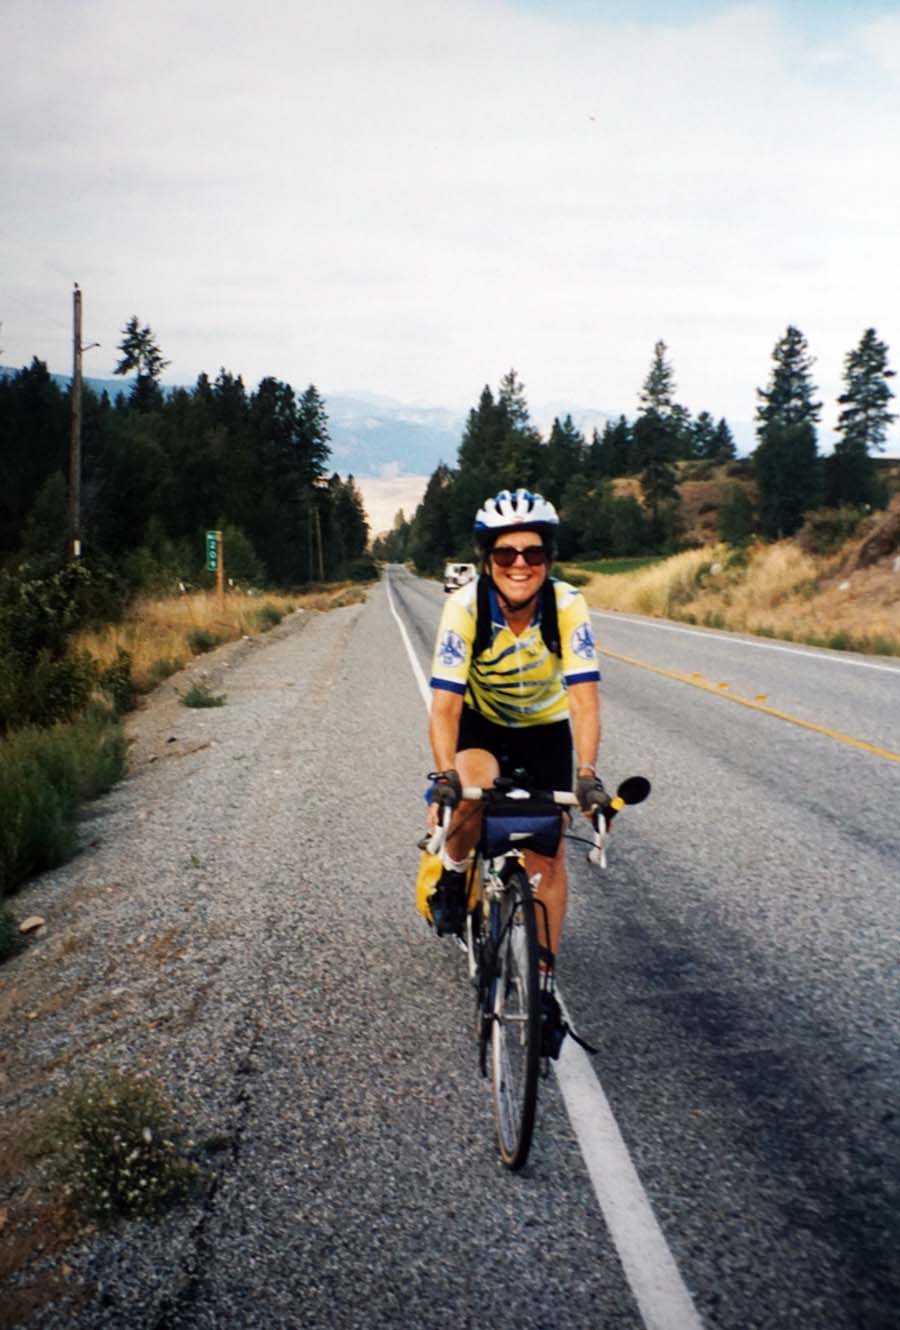 Aunt Liz grins while riding on the shoulder of a rural highway. There are trees along the roadway and mountains in the background.